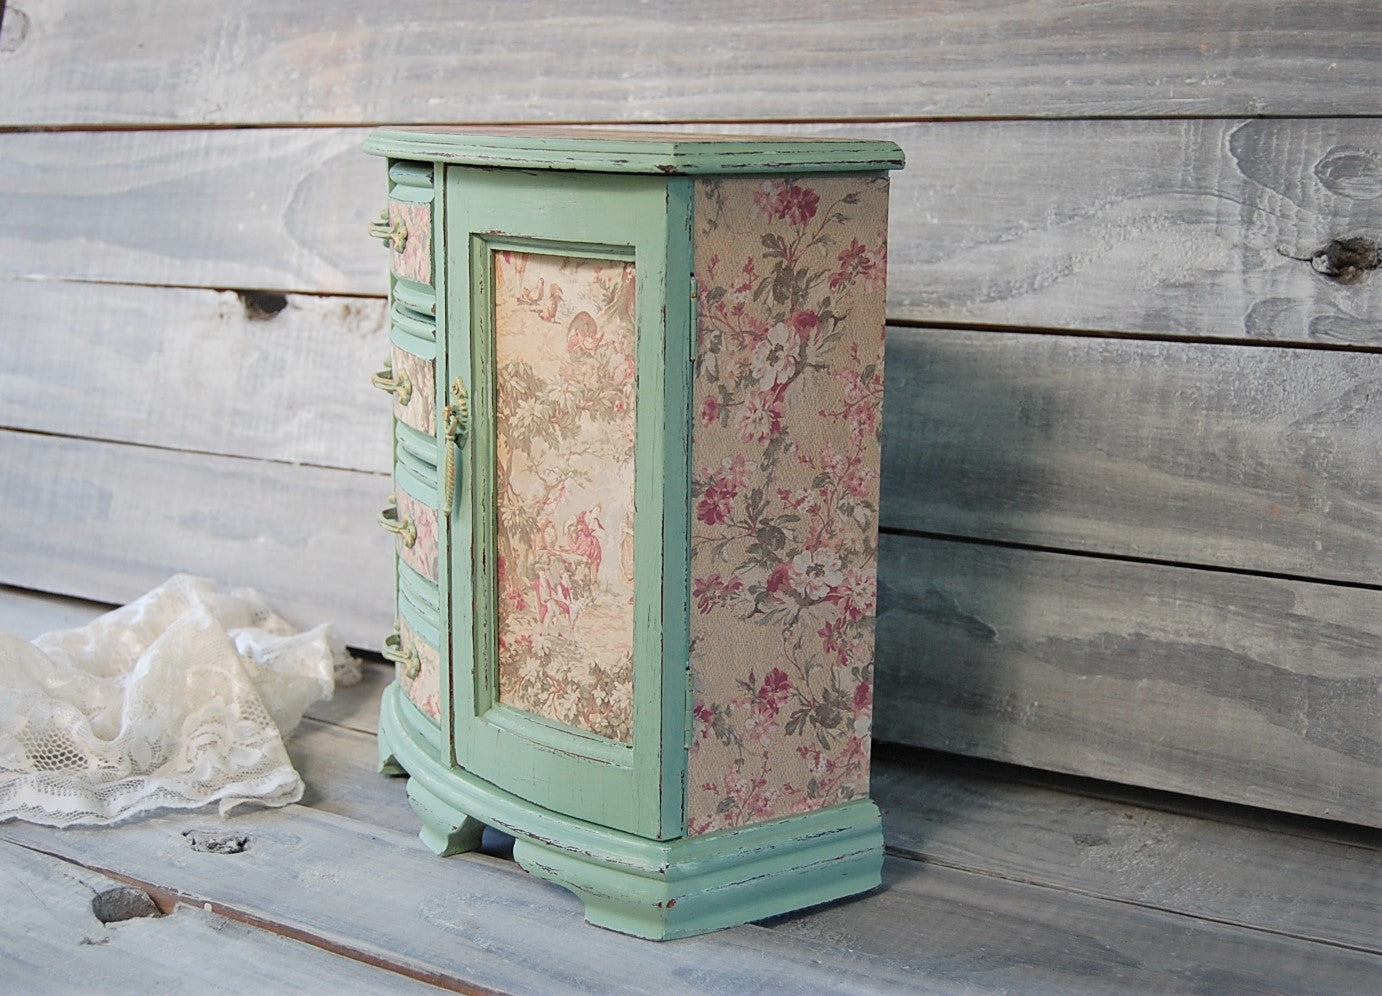 French toile jewelry armoire - The Vintage Artistry